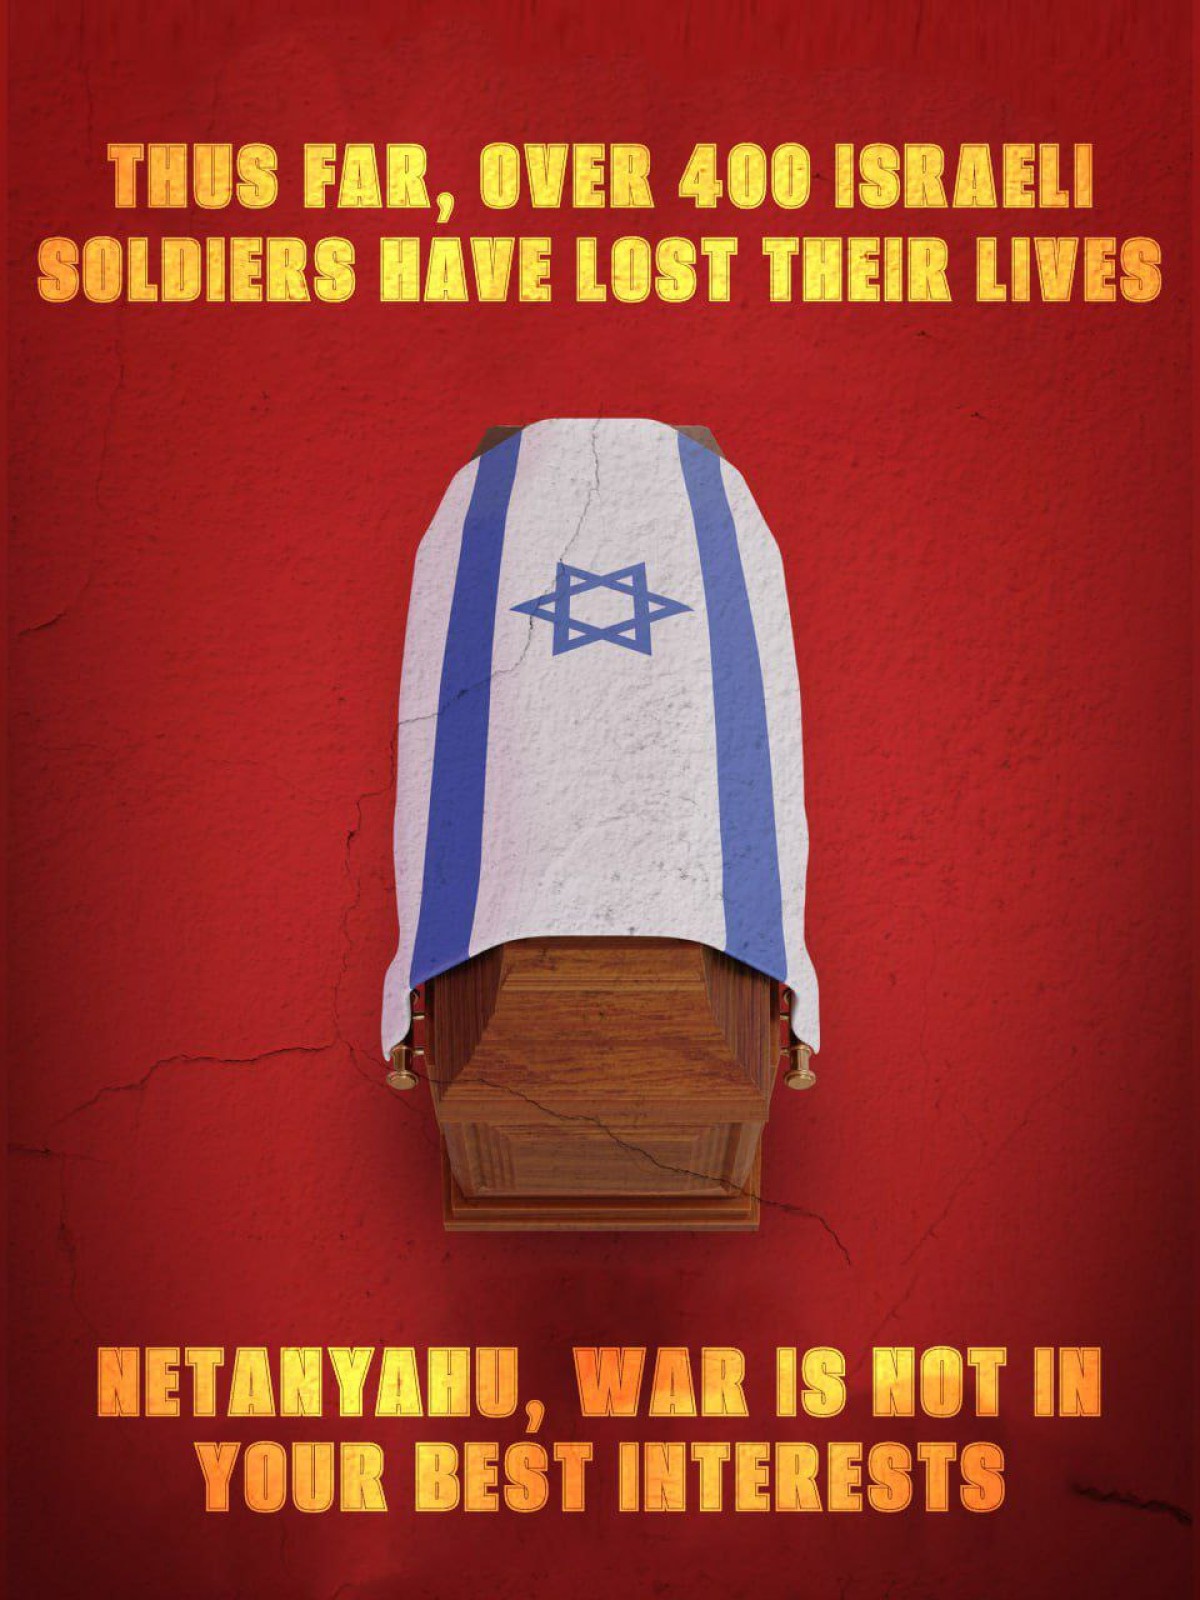 THUS FAR, OVER 400 ISRAELI SOLDIERS HAVE LOST THEIR LIVES NETANYAHU, WAR IS NOT IN YOUR BEST INTERESTS